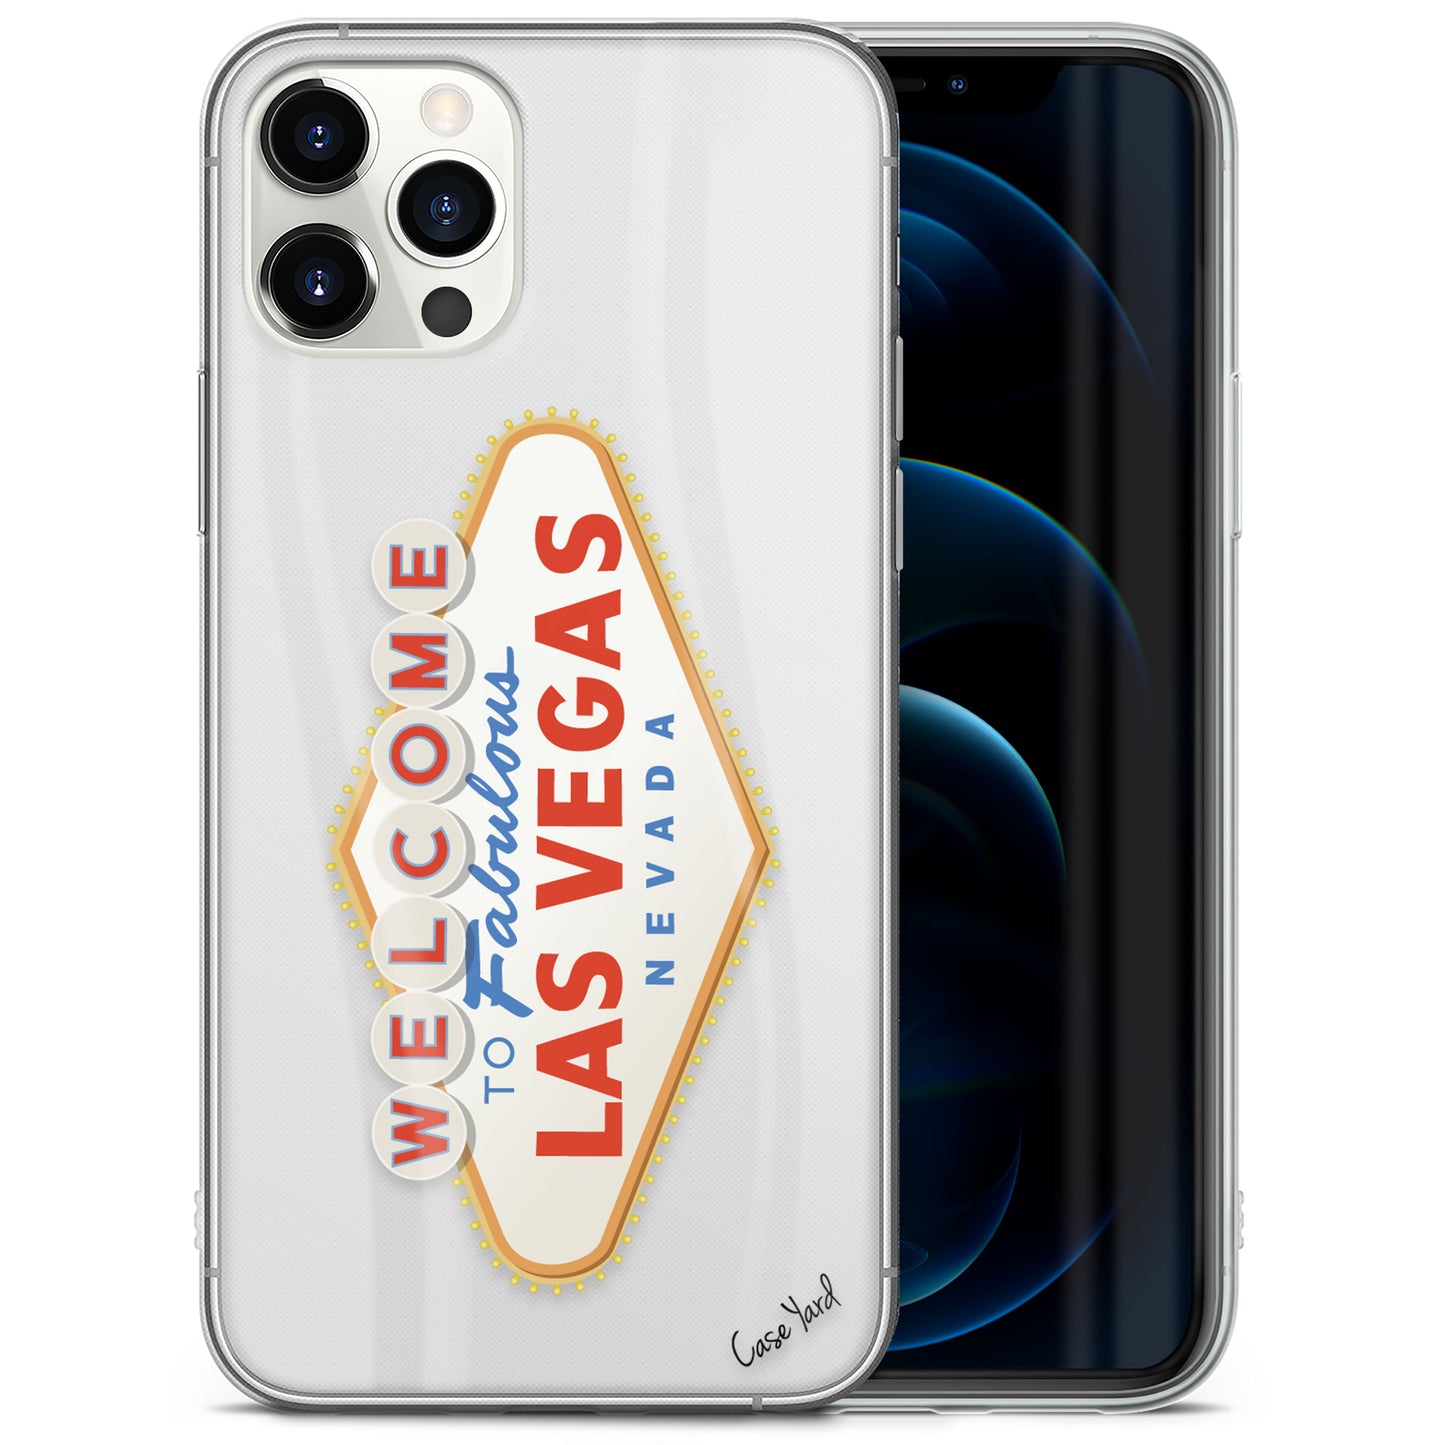 TPU Clear case with (Las Vegas Sign) Design for iPhone & Samsung Phones